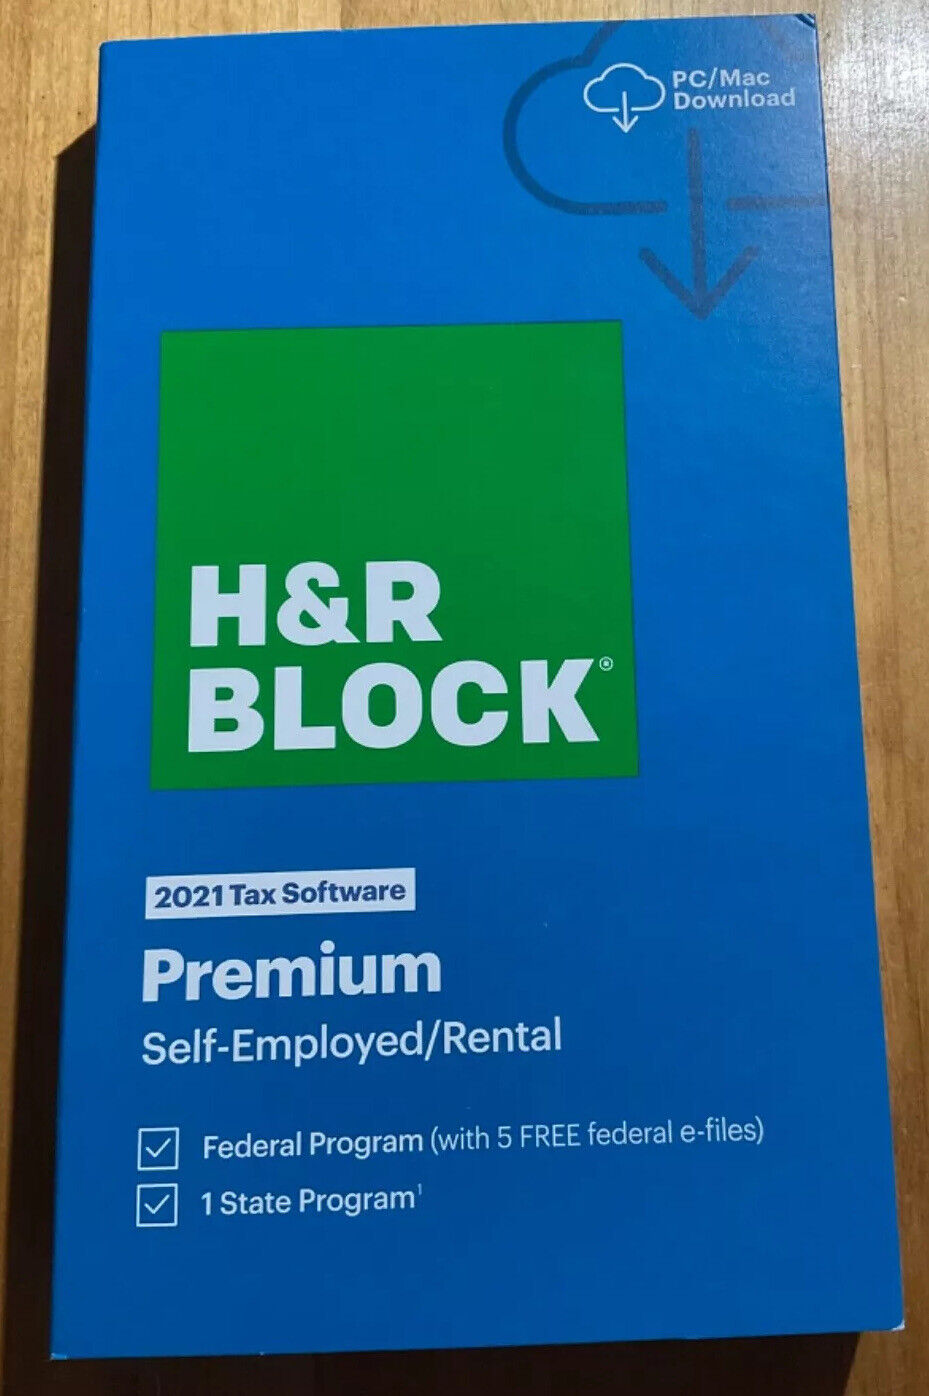 H&R Block 2021 Tax Software Premium [Physical Code by Mail]  PC/MAC New in BOX